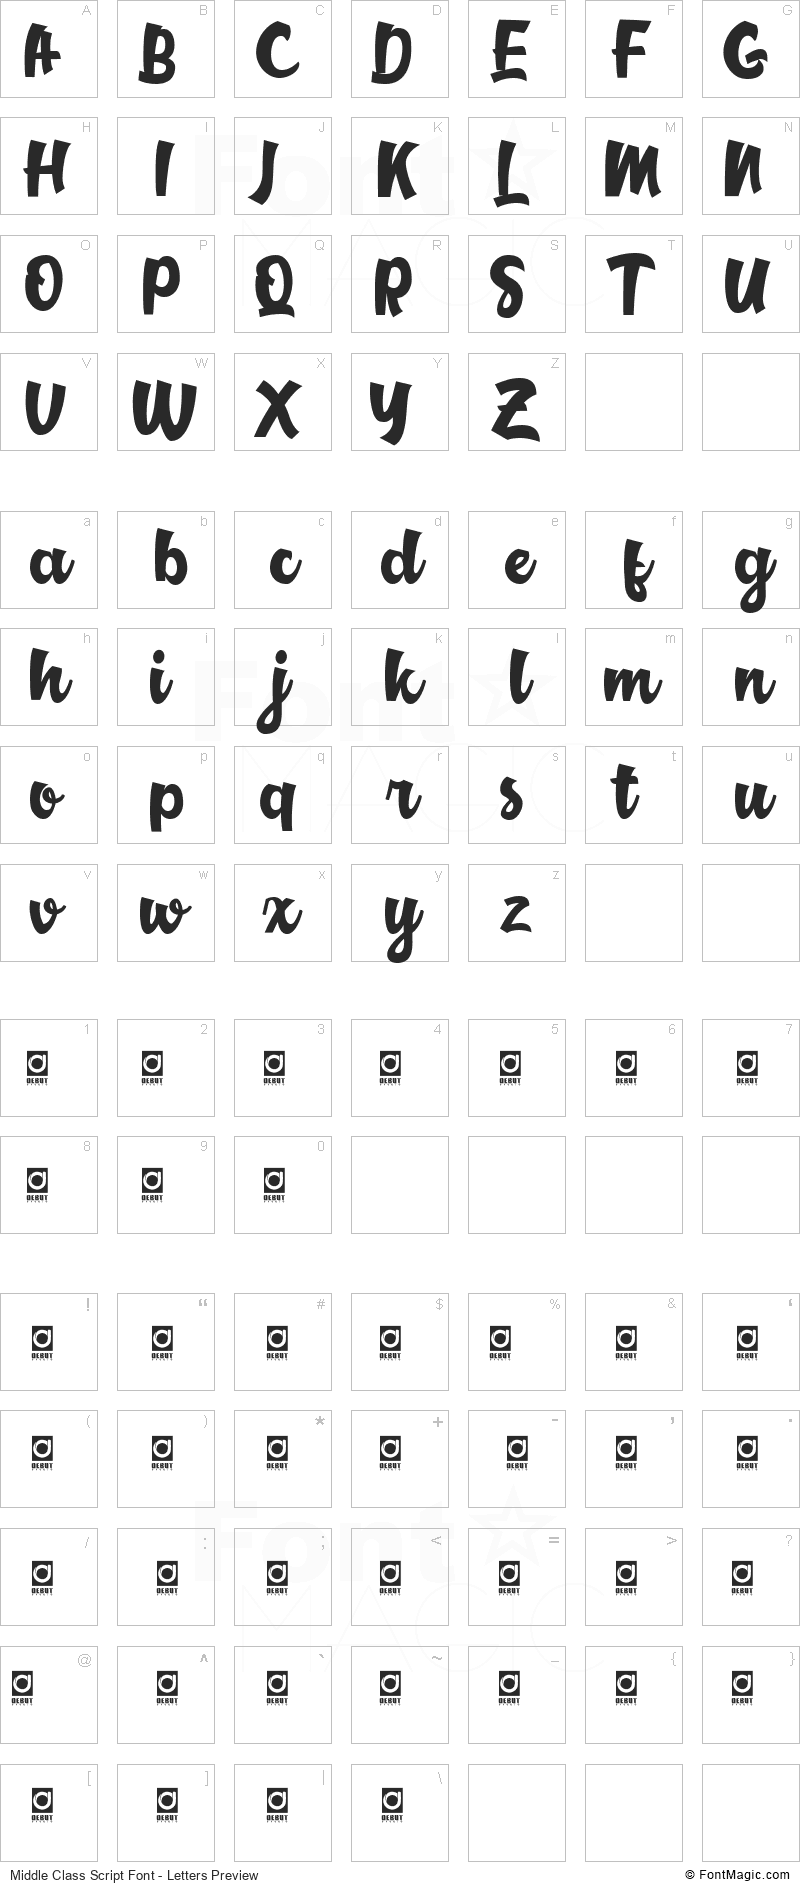 Middle Class Script Font - All Latters Preview Chart